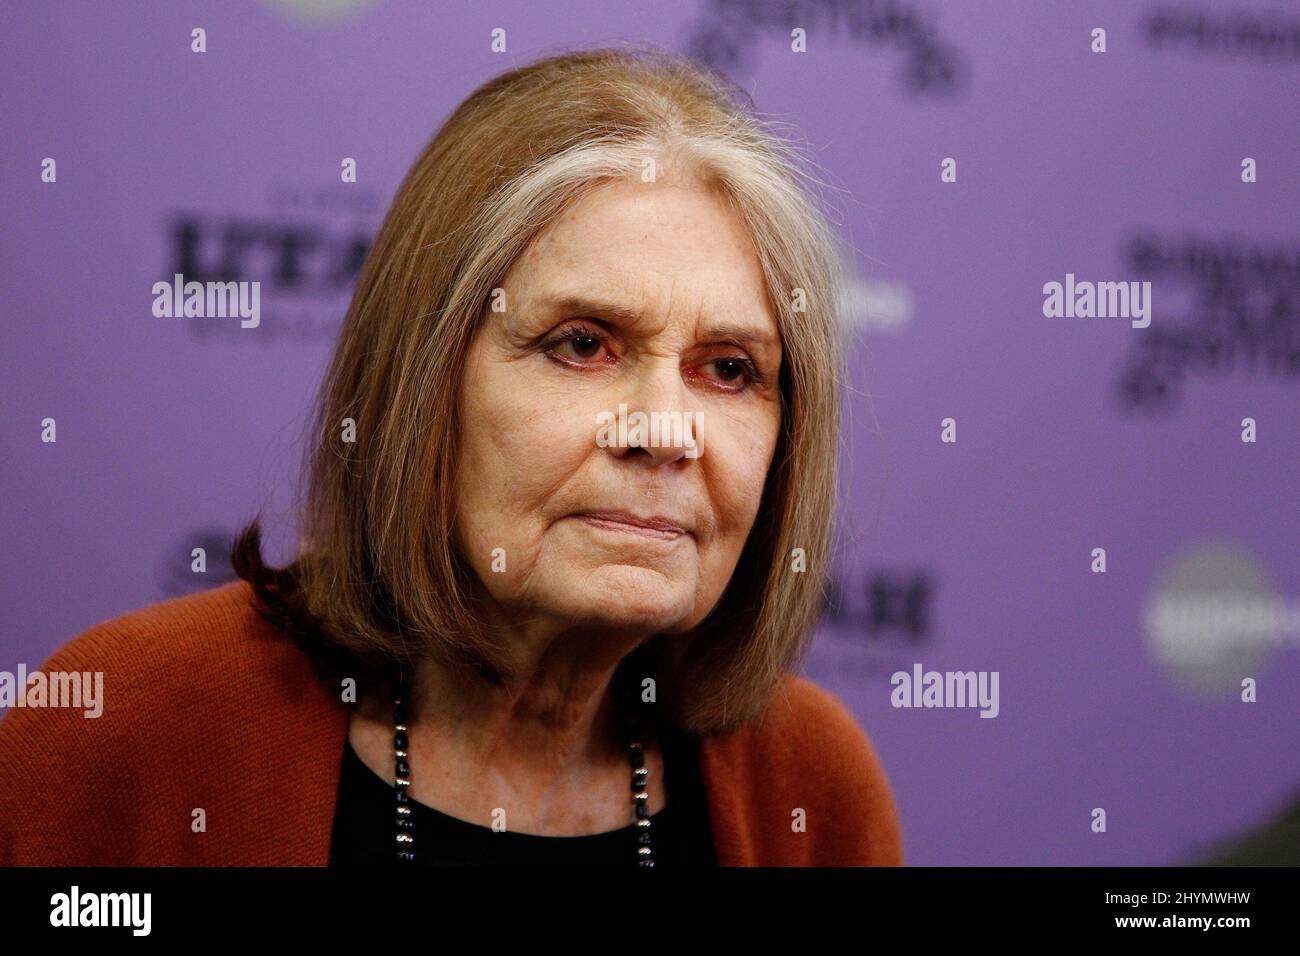 Gloria Steinem at the premiere of 'The Glorias' during the 2020 Sundance Film Festival held at the Eccles Theatre on January 26, 2020 in Park City, UT. Stock Photo